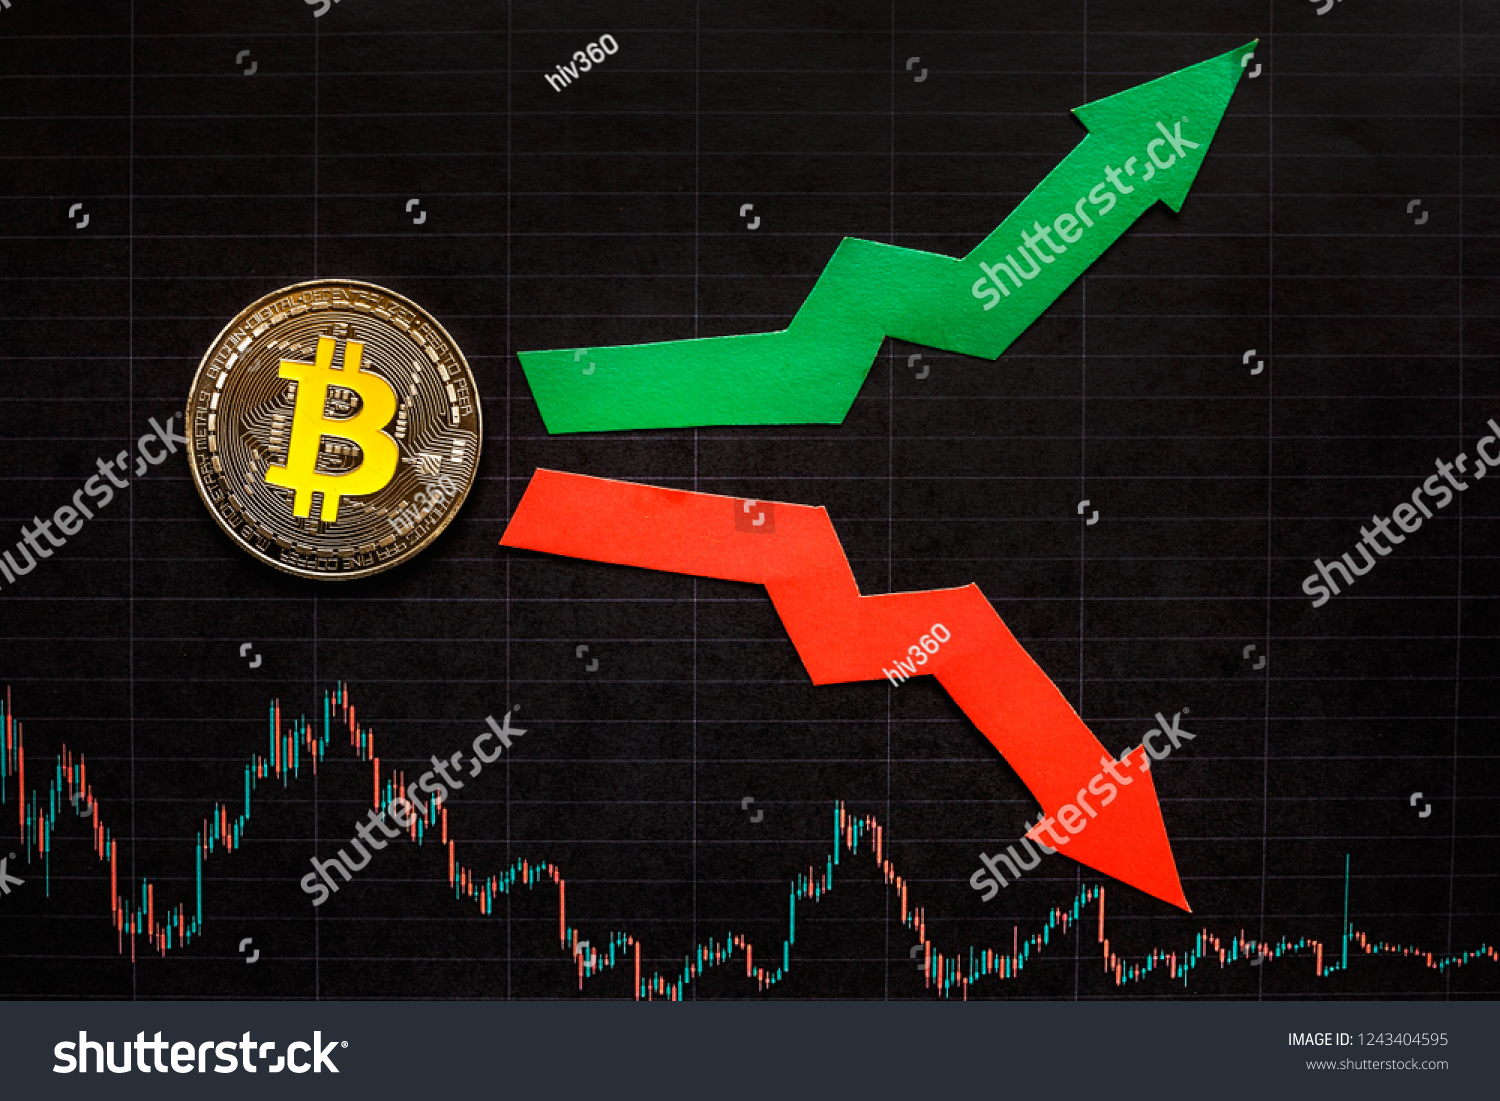 fluctuations  and forecasting of exchange rates of virtual money bitcoin. Red and green arrows with golden Bitcoin ladder on black paper forex chart background. Cryptocurrency concept. #1243404595